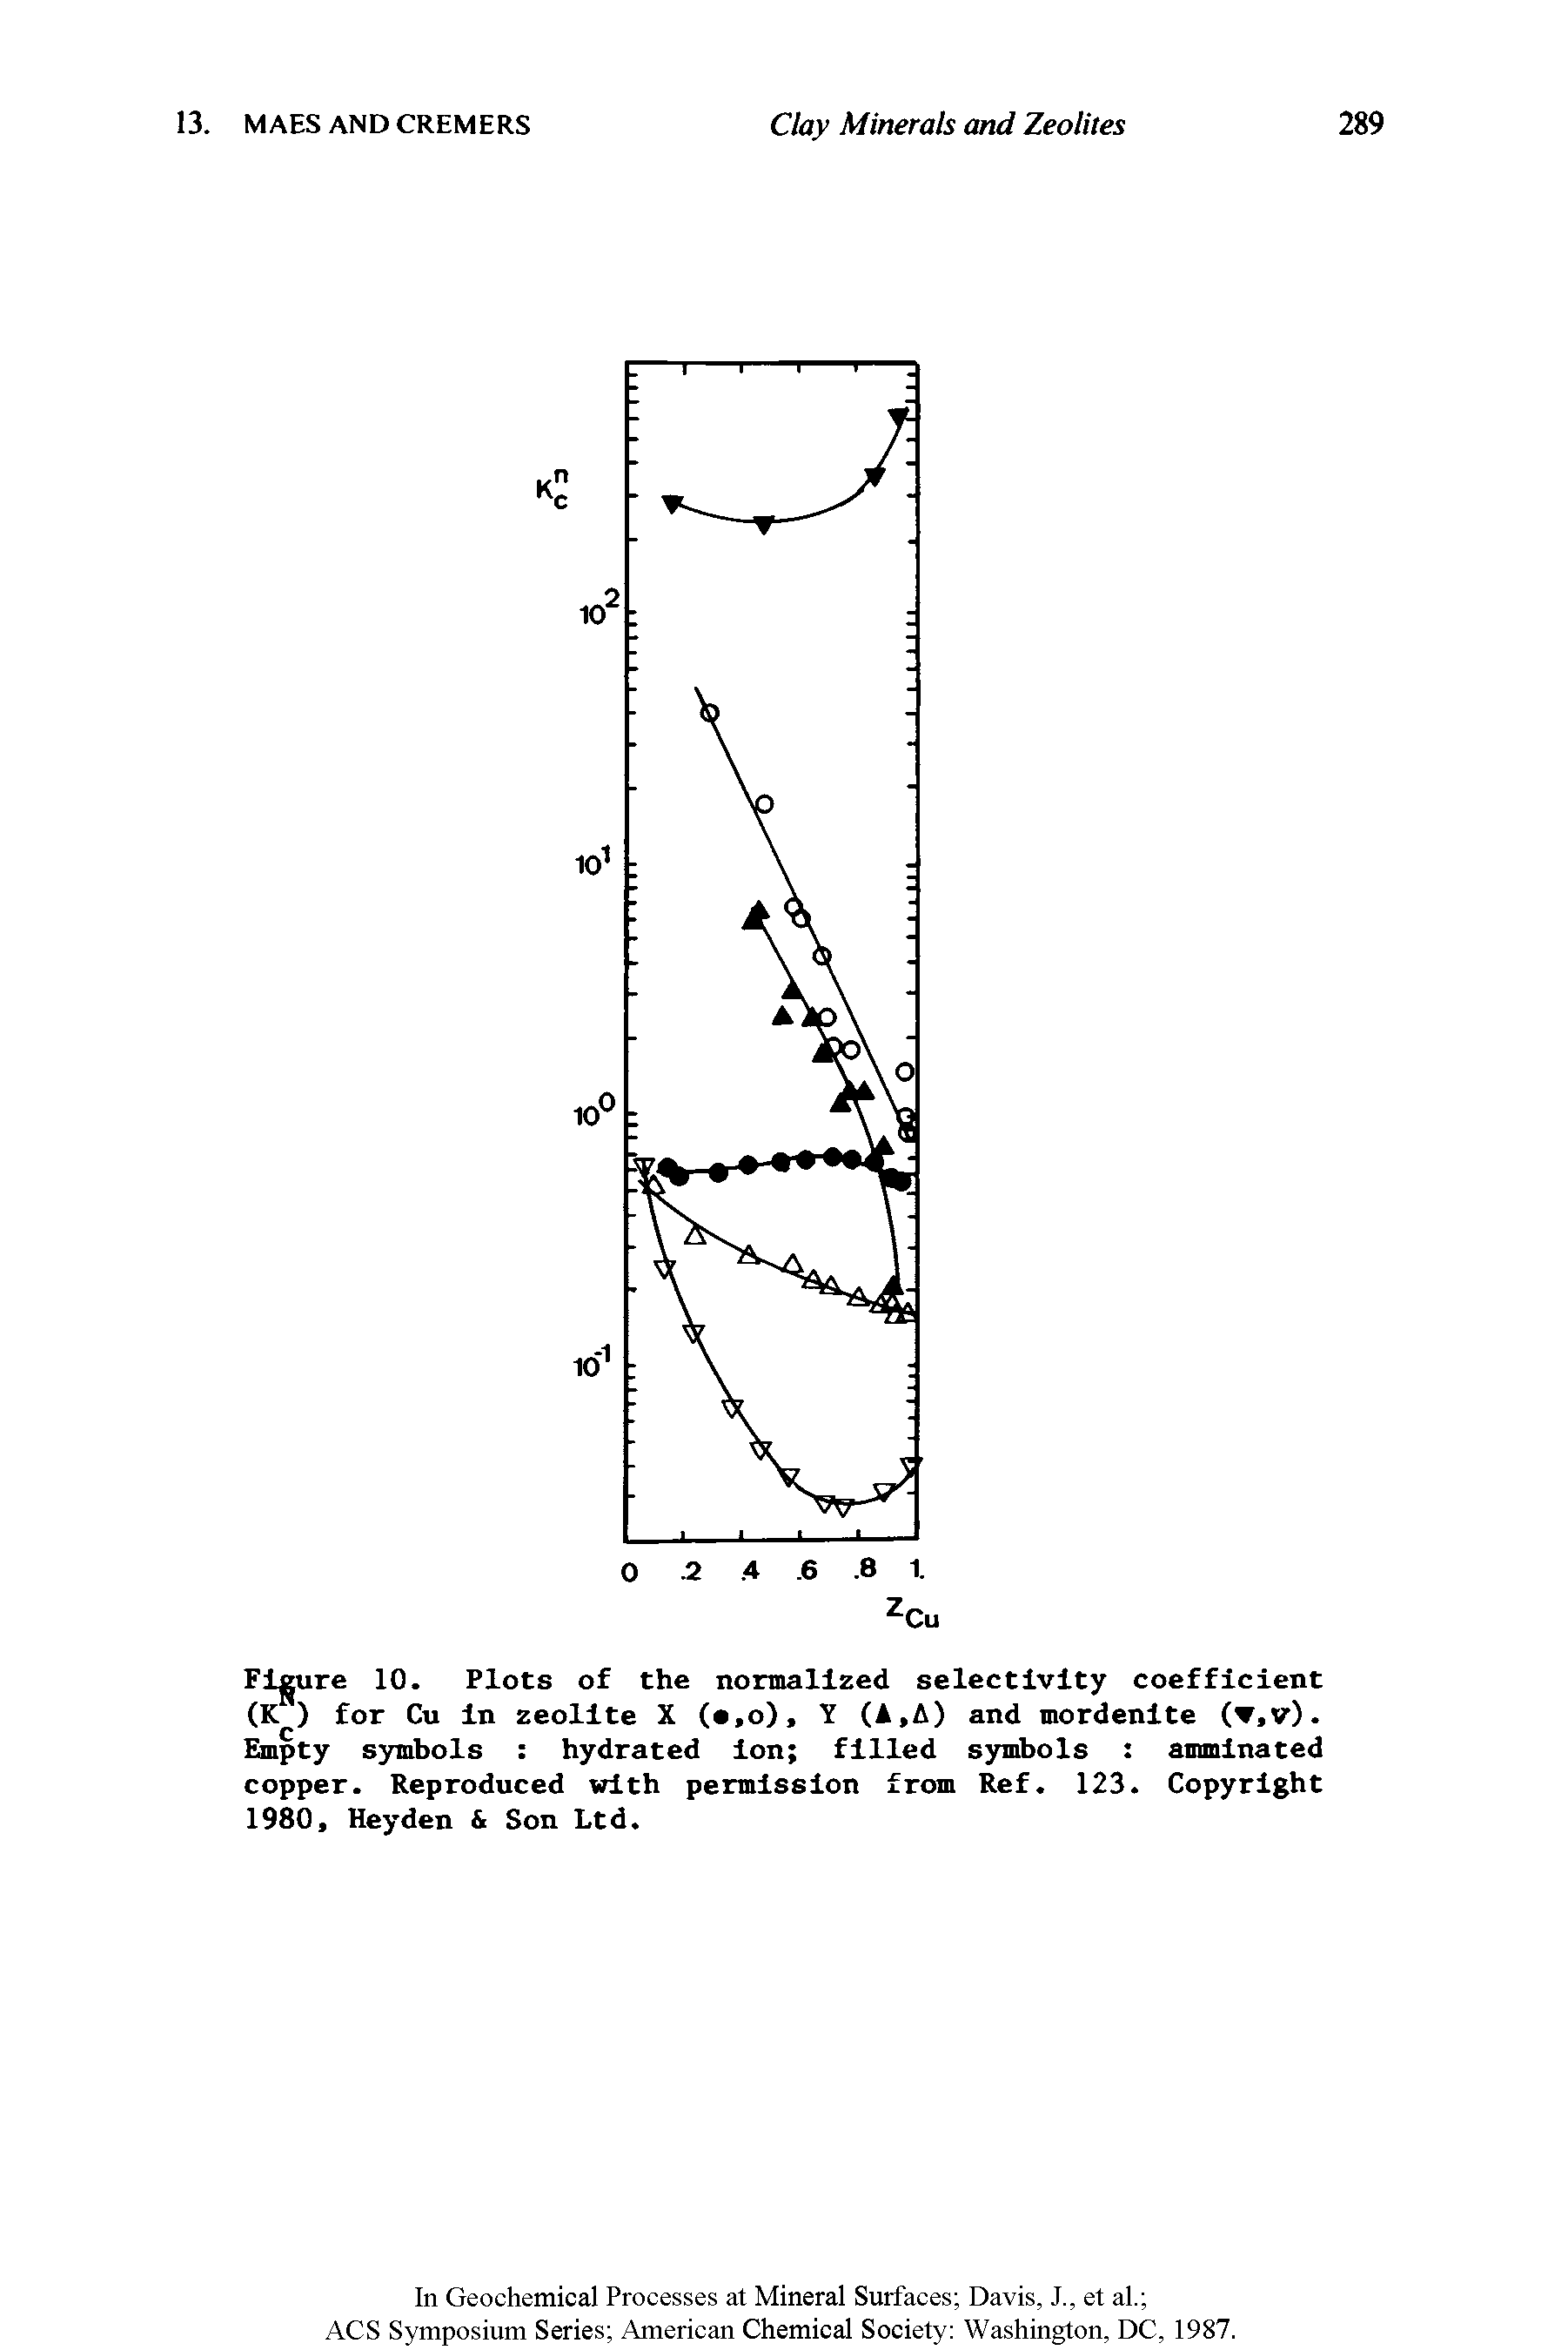 Figure 10. Plots of the normalized selectivity coefficient (K ) for Cu in zeolite X (, o), Y (A,A) and mordenite (t,v). Empty symbols hydrated ion filled symbols amminated copper. Reproduced with permission from Ref. 123. Copyright 1980, Heyden Son Ltd.